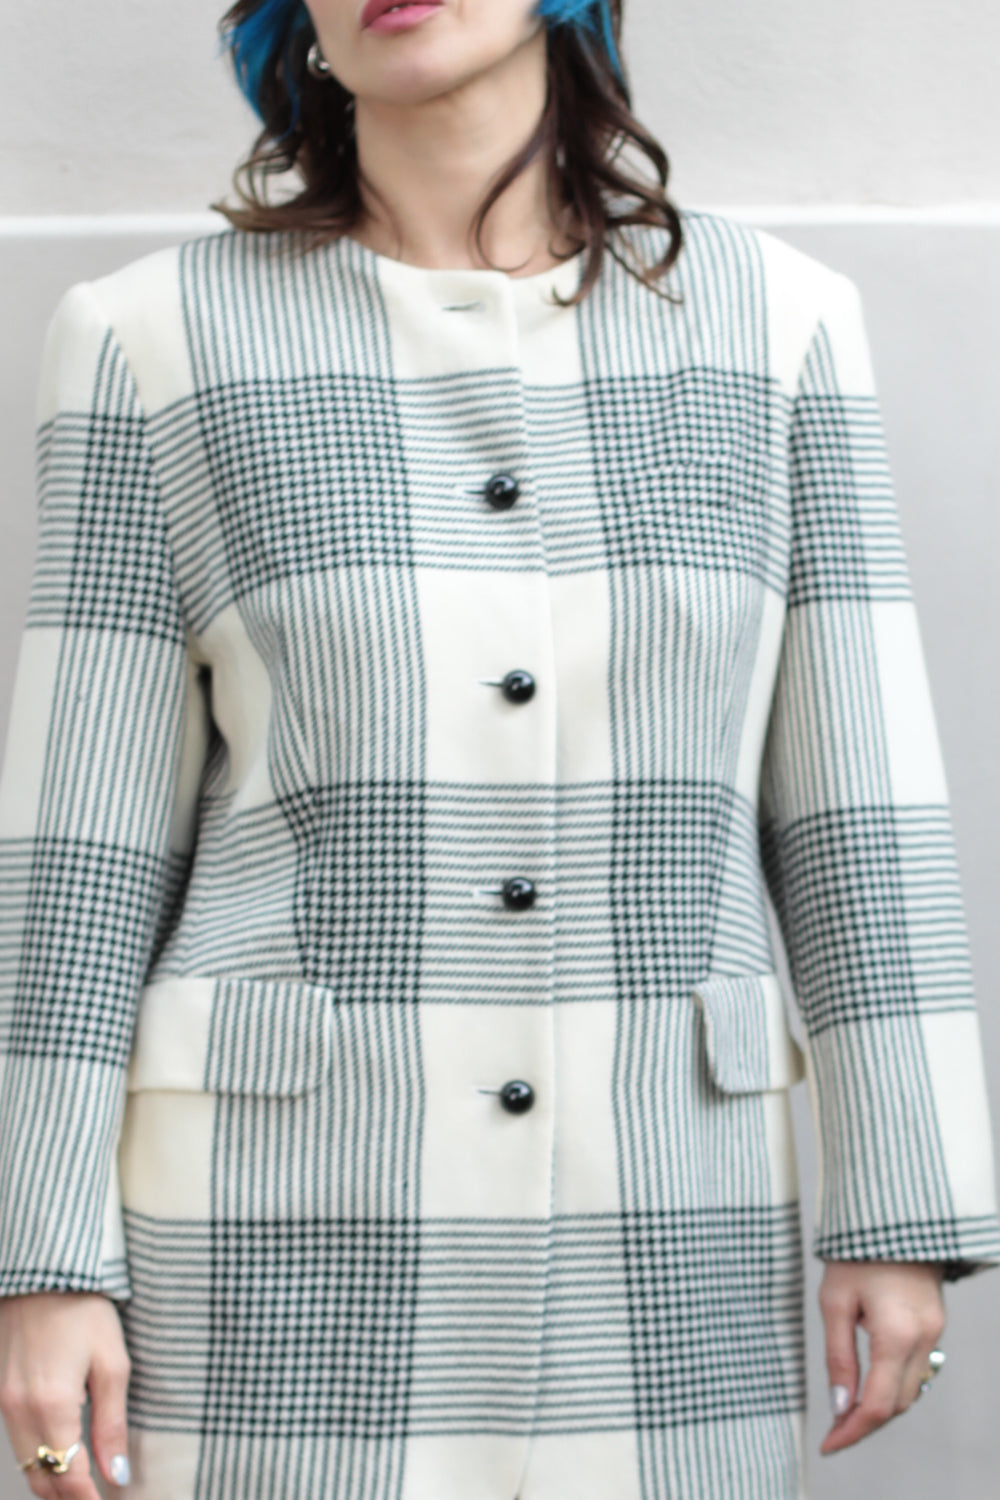 Vintage 80s Betty Barclay Wool Jacket